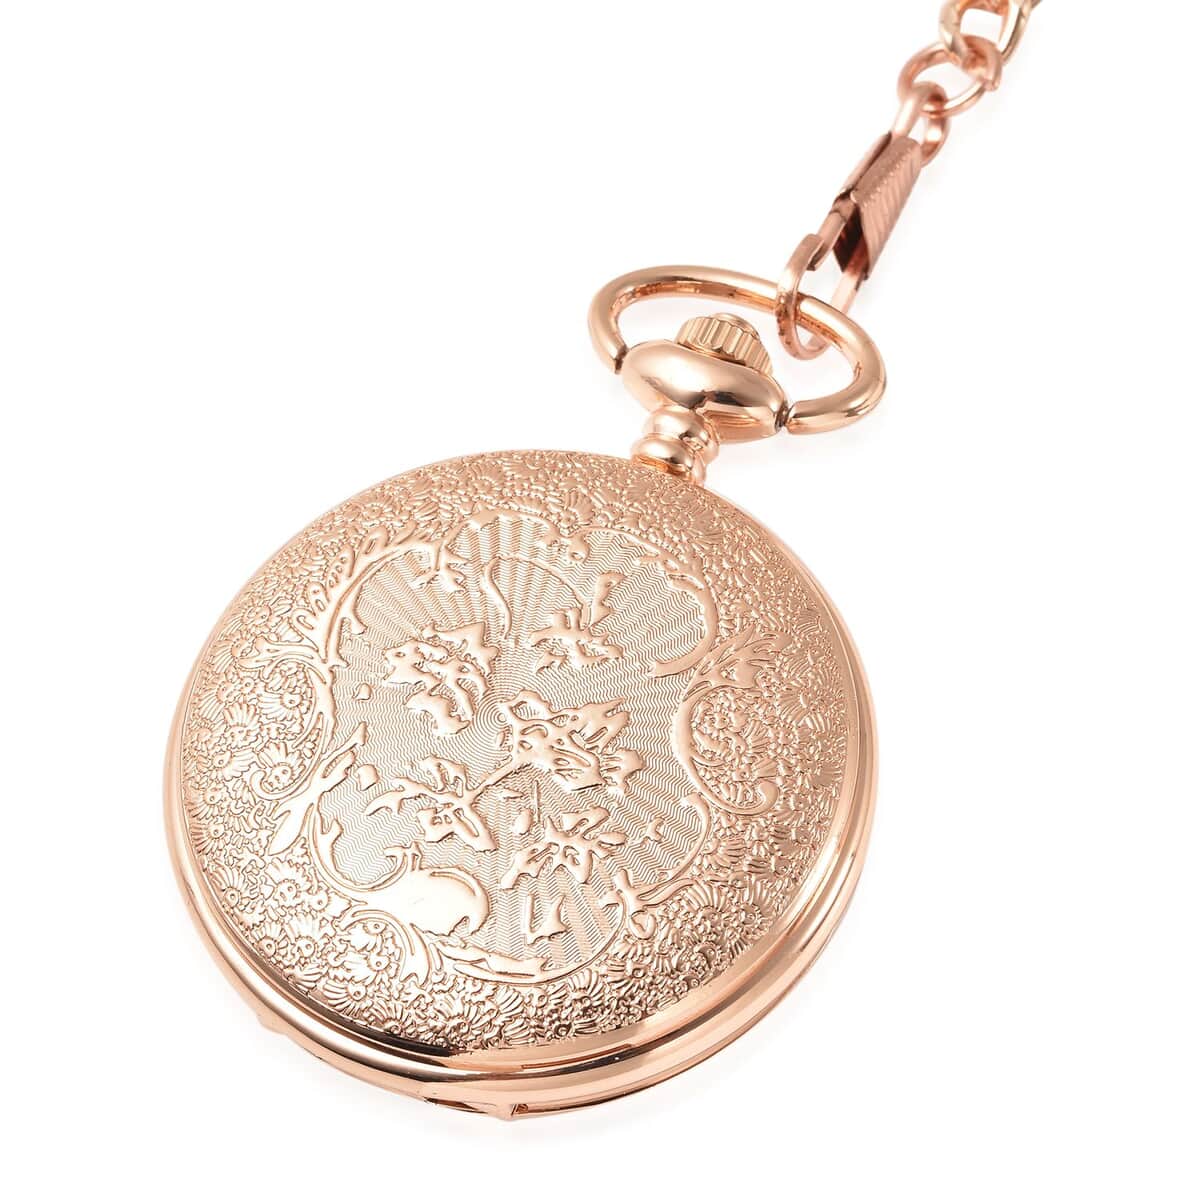 Strada Japanese Movement Compass Pattern Pocket Watch in Rosetone With Chain (14-18 Inches) (47.24 mm) image number 3